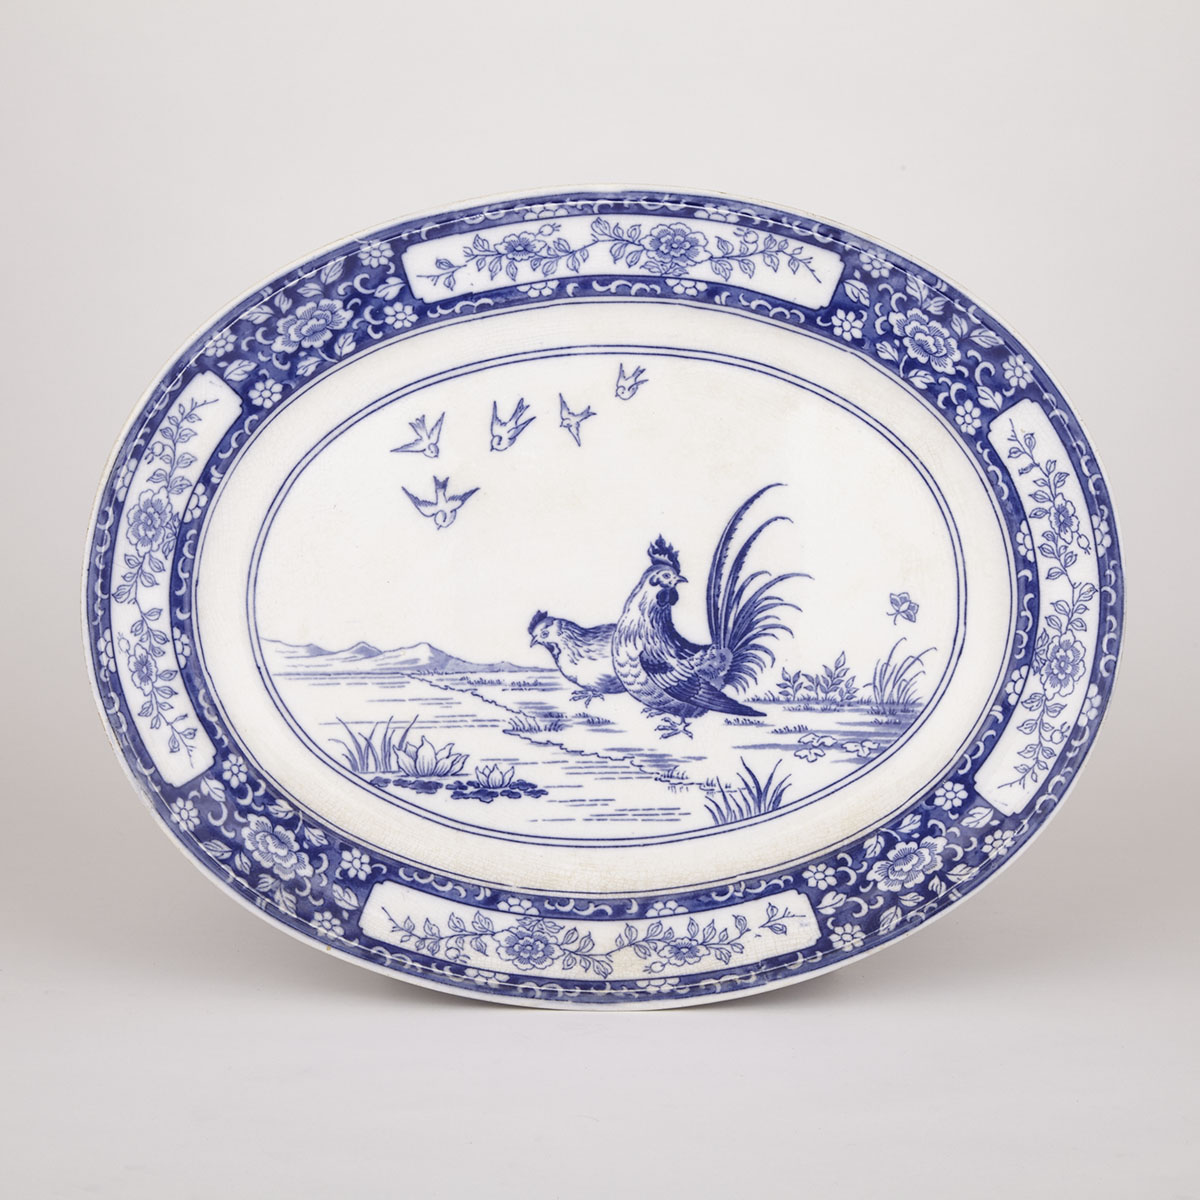 Mintons Blue Printed ‘Alnwick’ Oval Platter, 1879